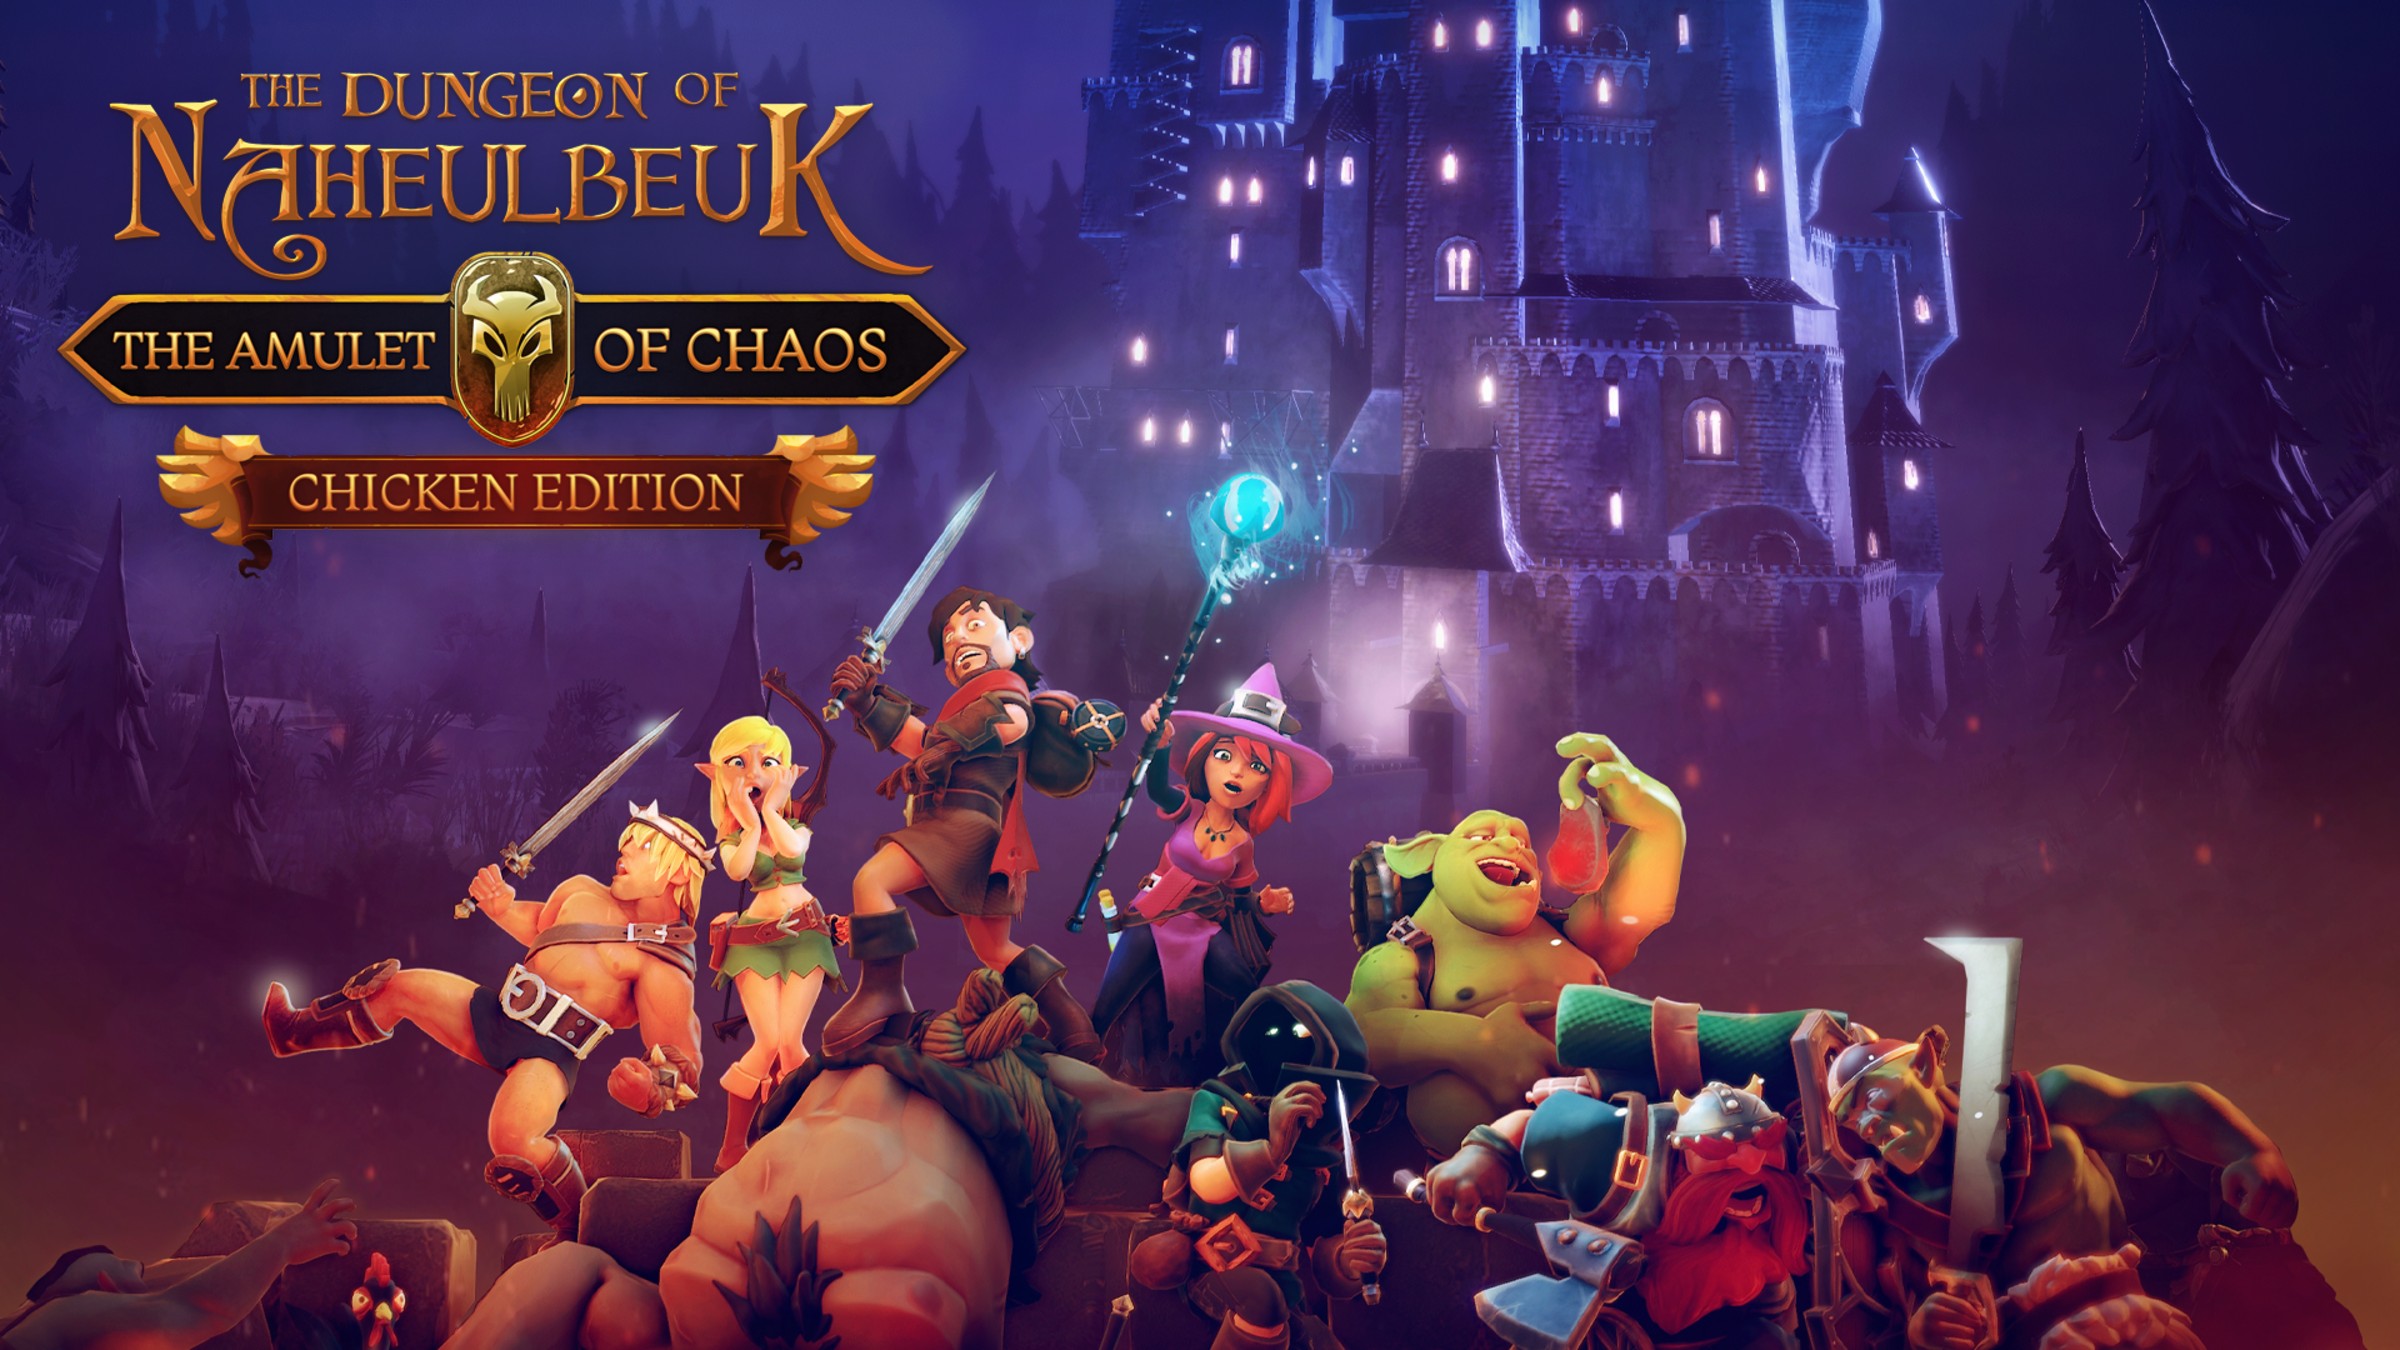 The Dungeon of Naheulbeuk: The Amulet of Chaos - Chicken Edition (Nintendo Switch Digital Download) $7.99